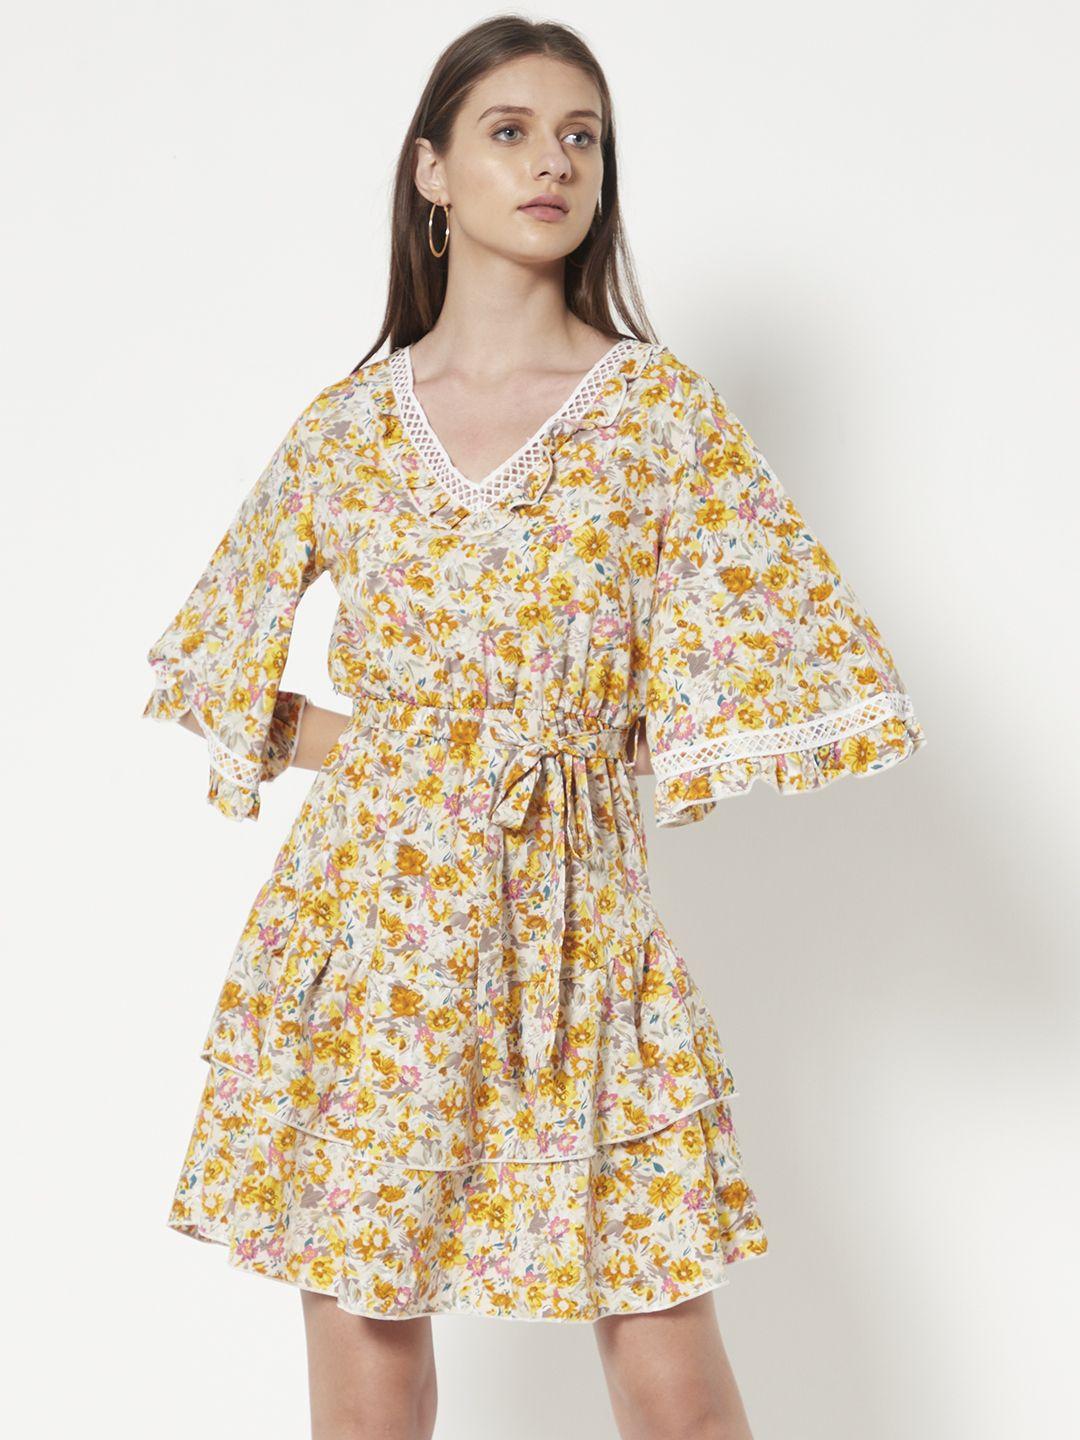 urbanic yellow & white floral print a-line dress with belt